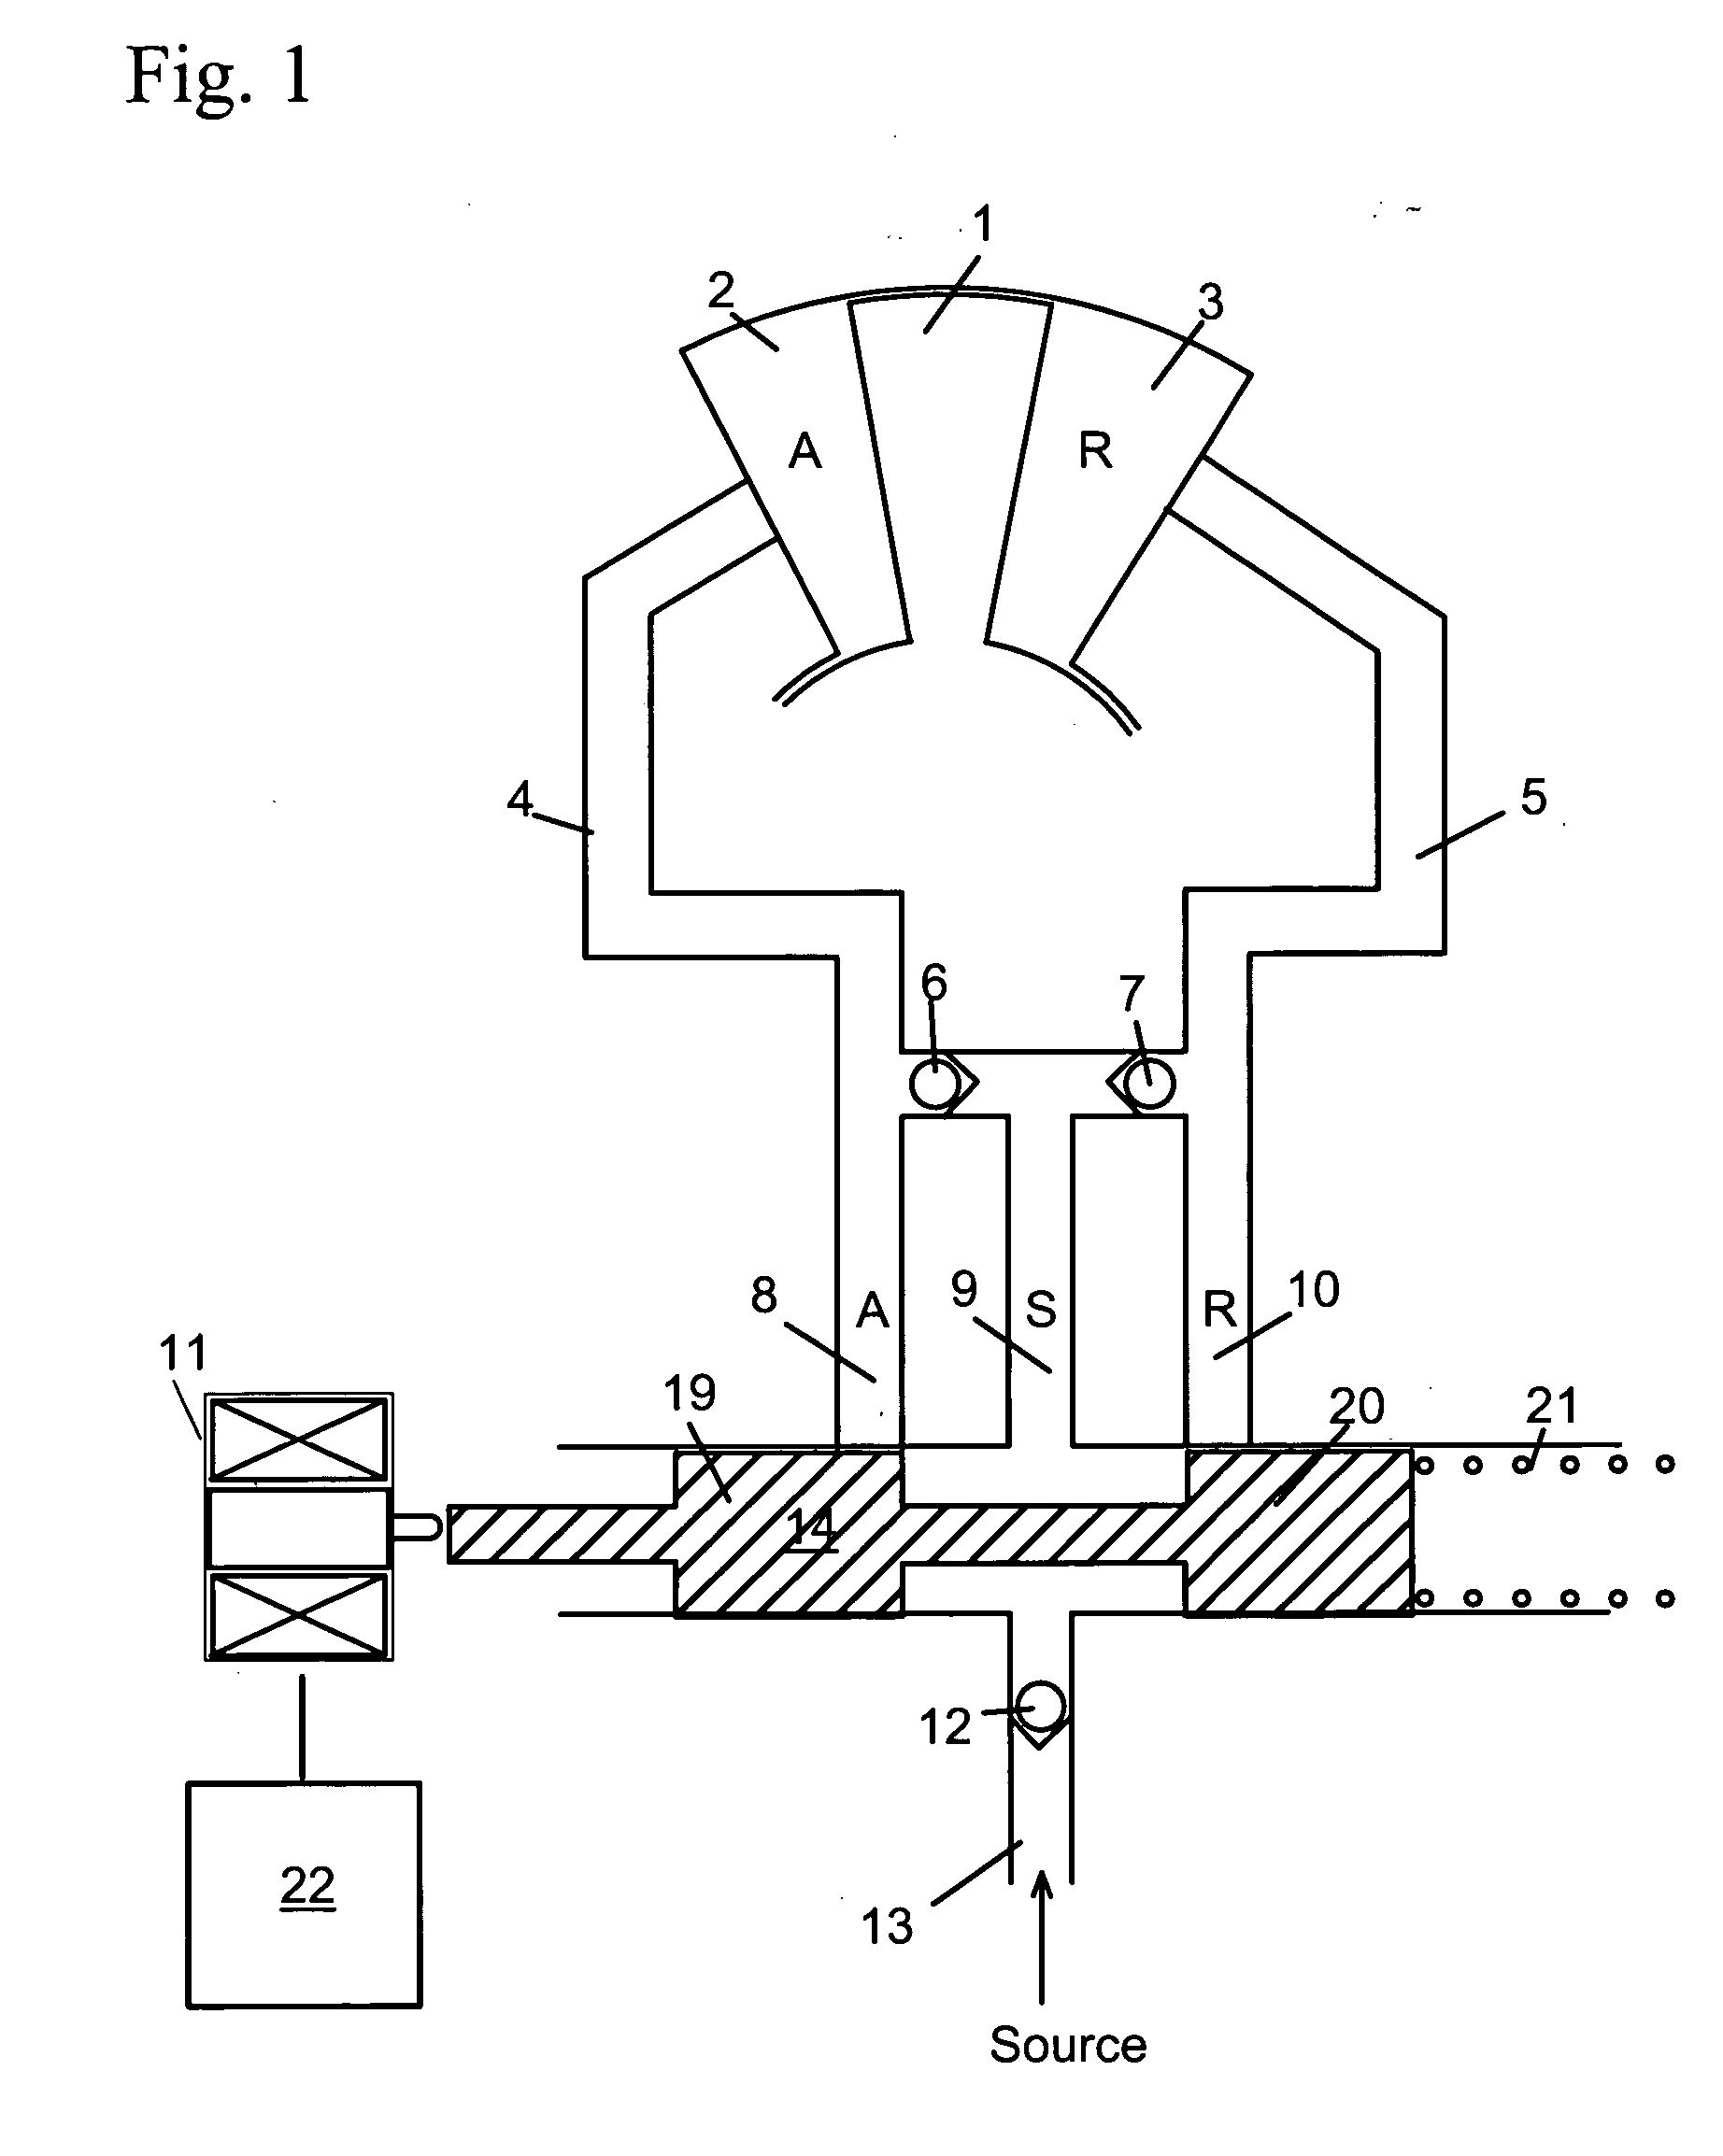 Method of changing the duty cycle frequency of a PWM solenoid on a CAM phaser to increase compliance in a timing drive